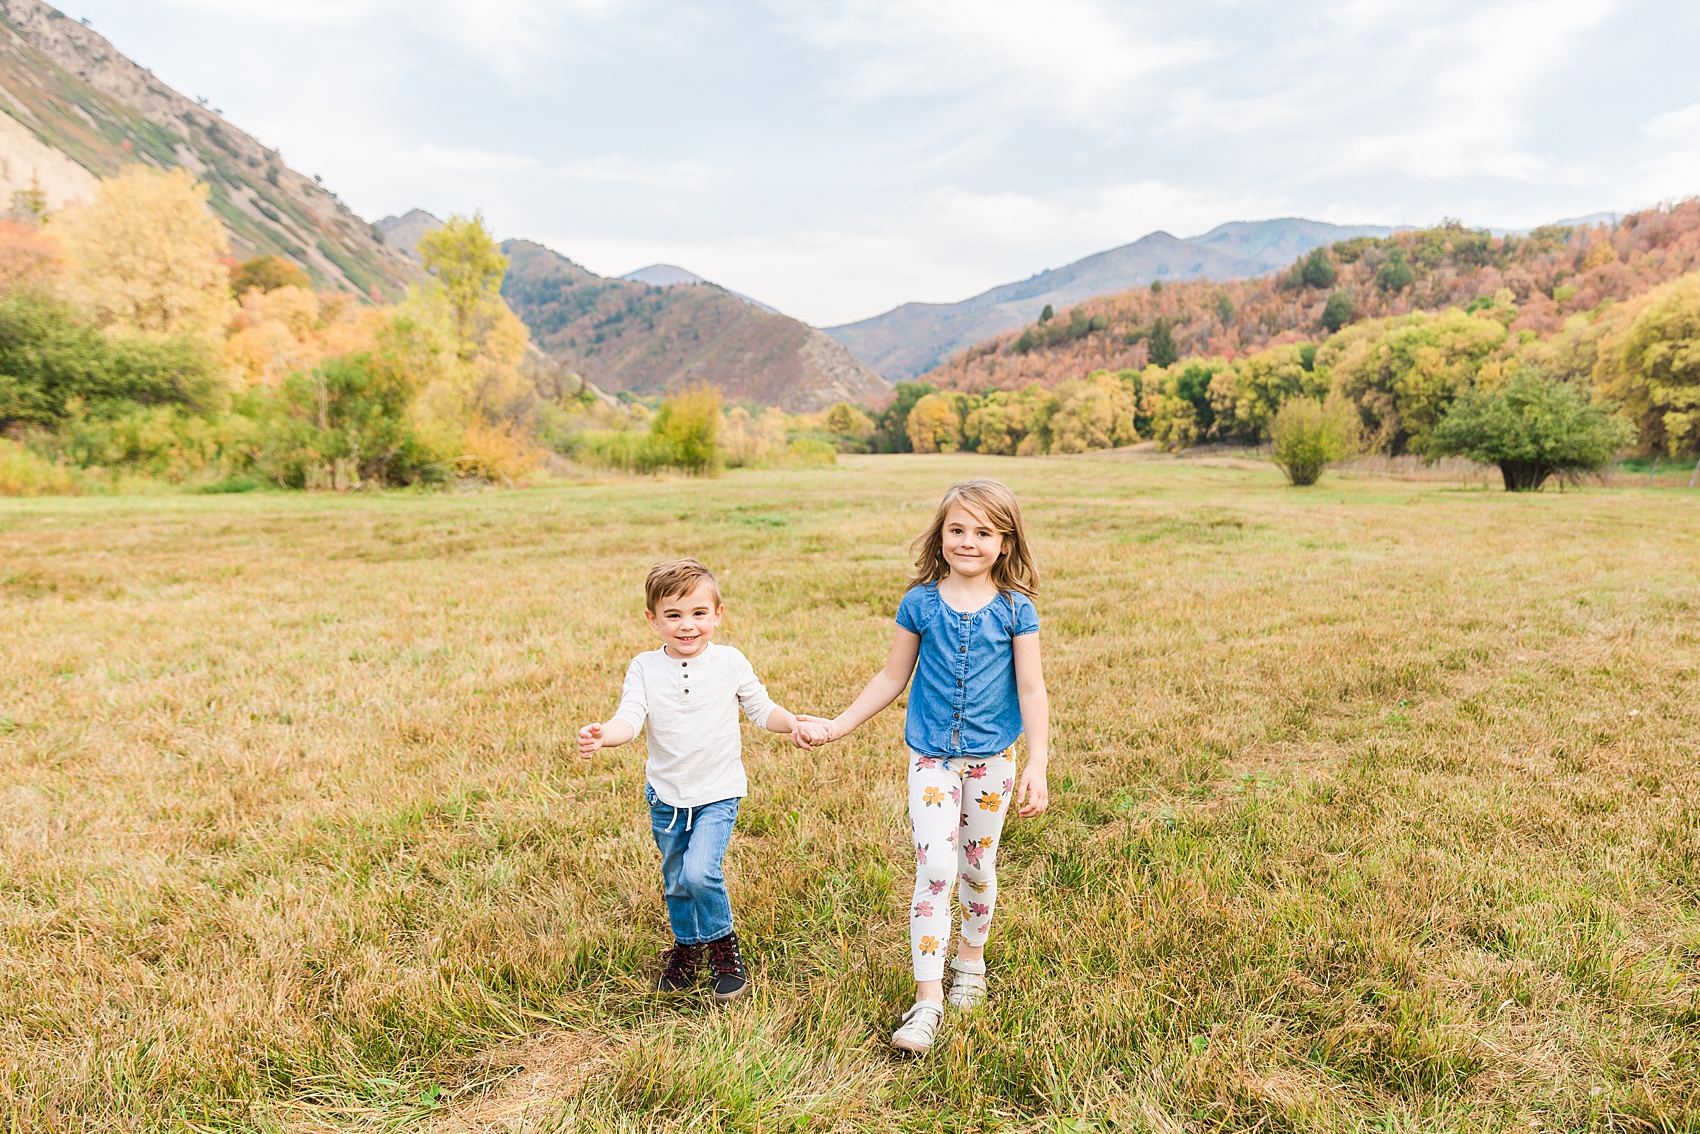 Leah Hope Photography | Salt Lake City Provo Canyon Utah Family Photos | Green Nature Mountain Views Canyon Fall Family Pictures | What to Wear | Family Posing Poses | Scottsdale Photographer | Family Child Photographer | Outfits and Styling Ideas | Family Photography | Playful and Candid | Joyful Happy Family Photography